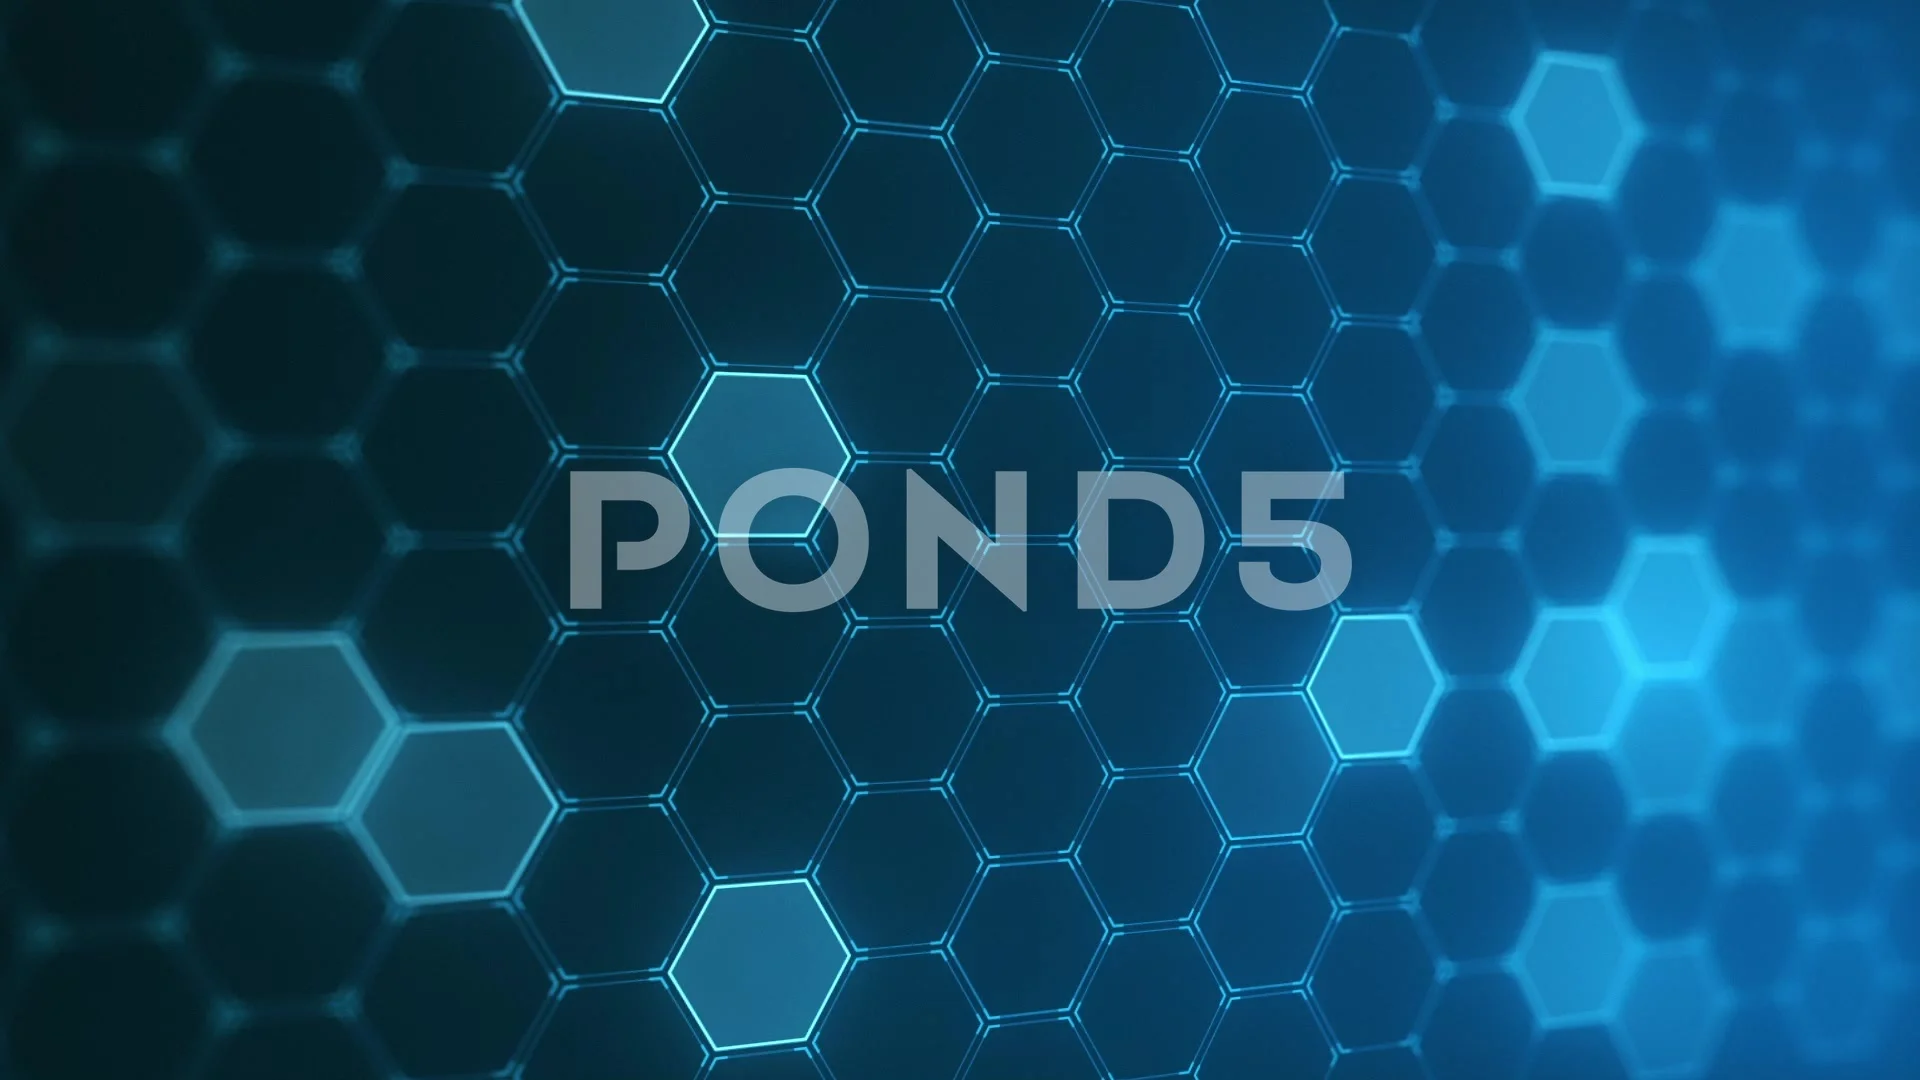 Download wallpapers honeycomb blue background blue hexagons background  digital technology blue background blue abstraction honeycomb  abstraction blue rays background for desktop free Pictures for desktop  free